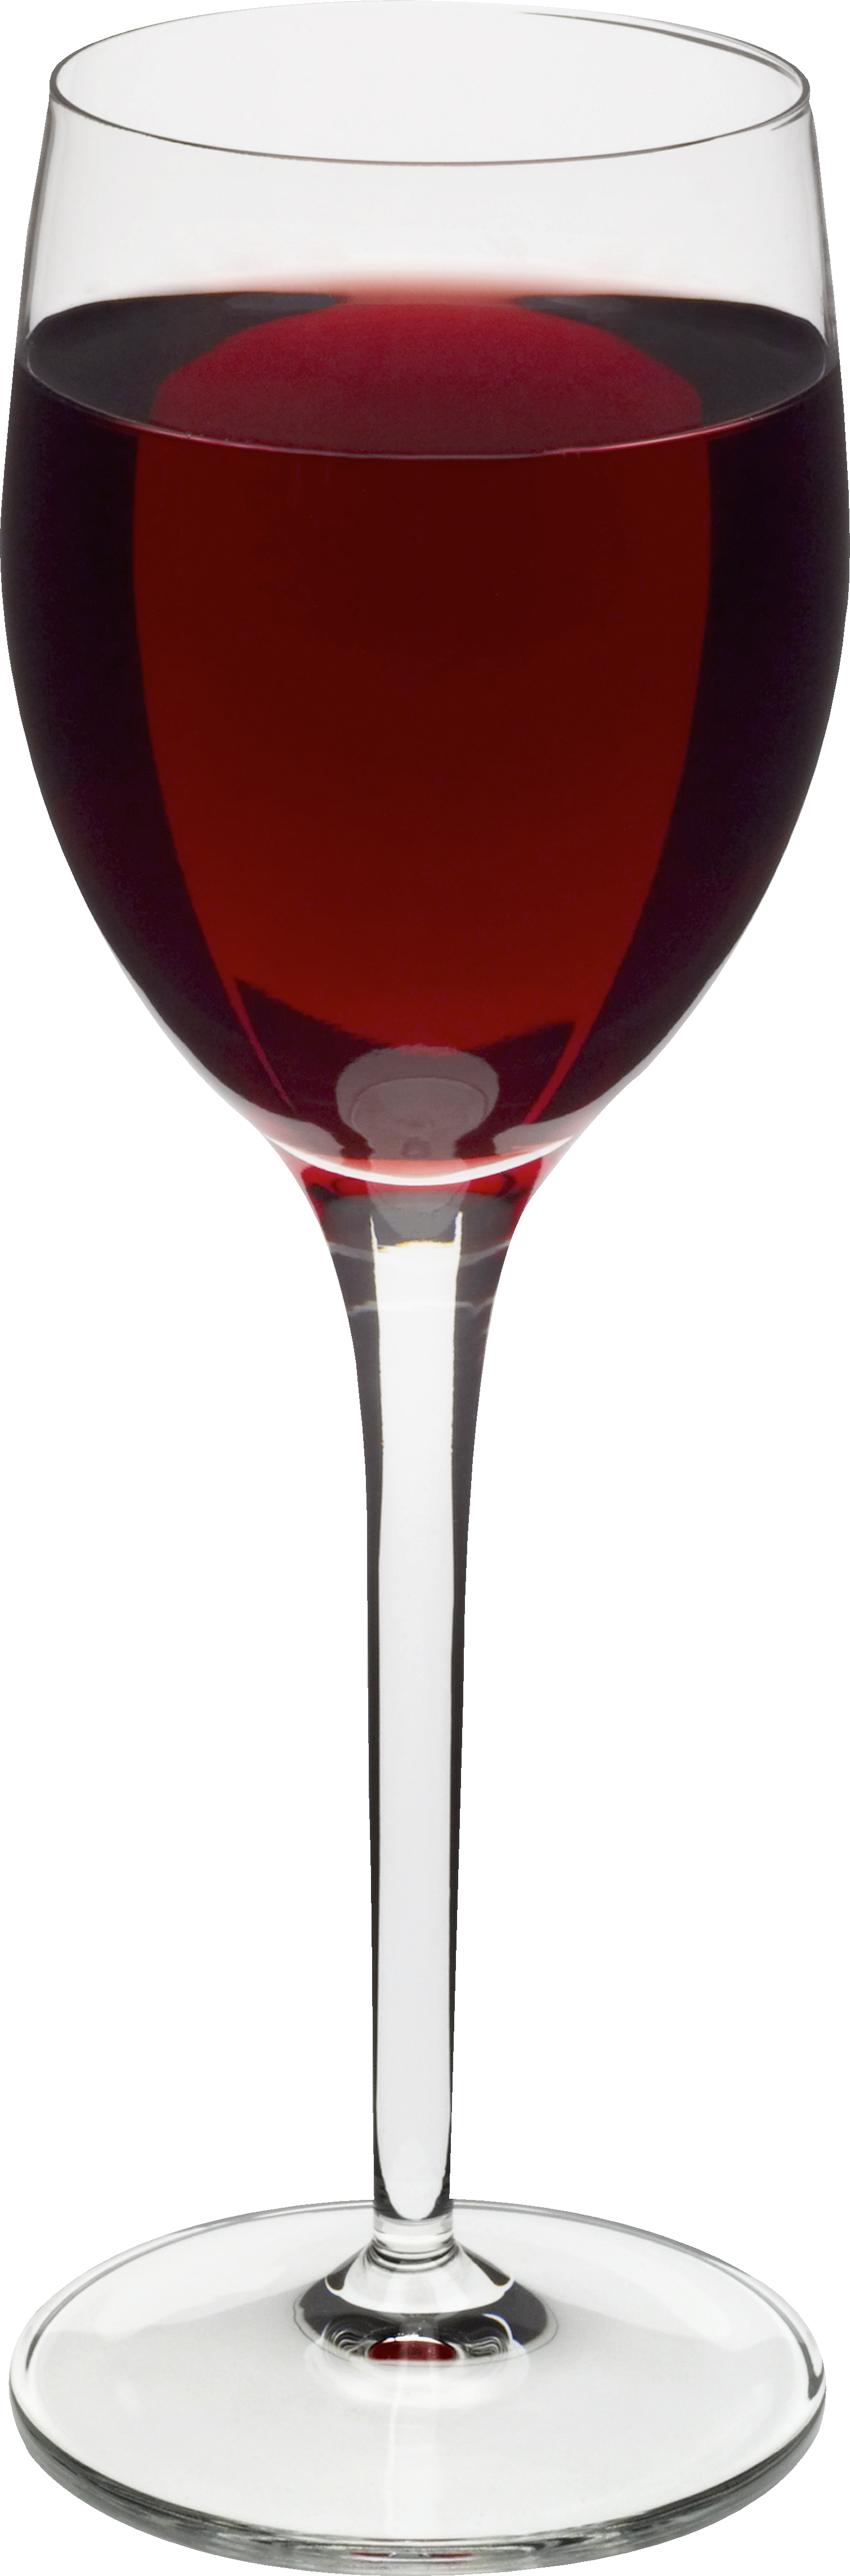 Wine Glass Png Hd Images - Find over 100+ of the best free wine glass